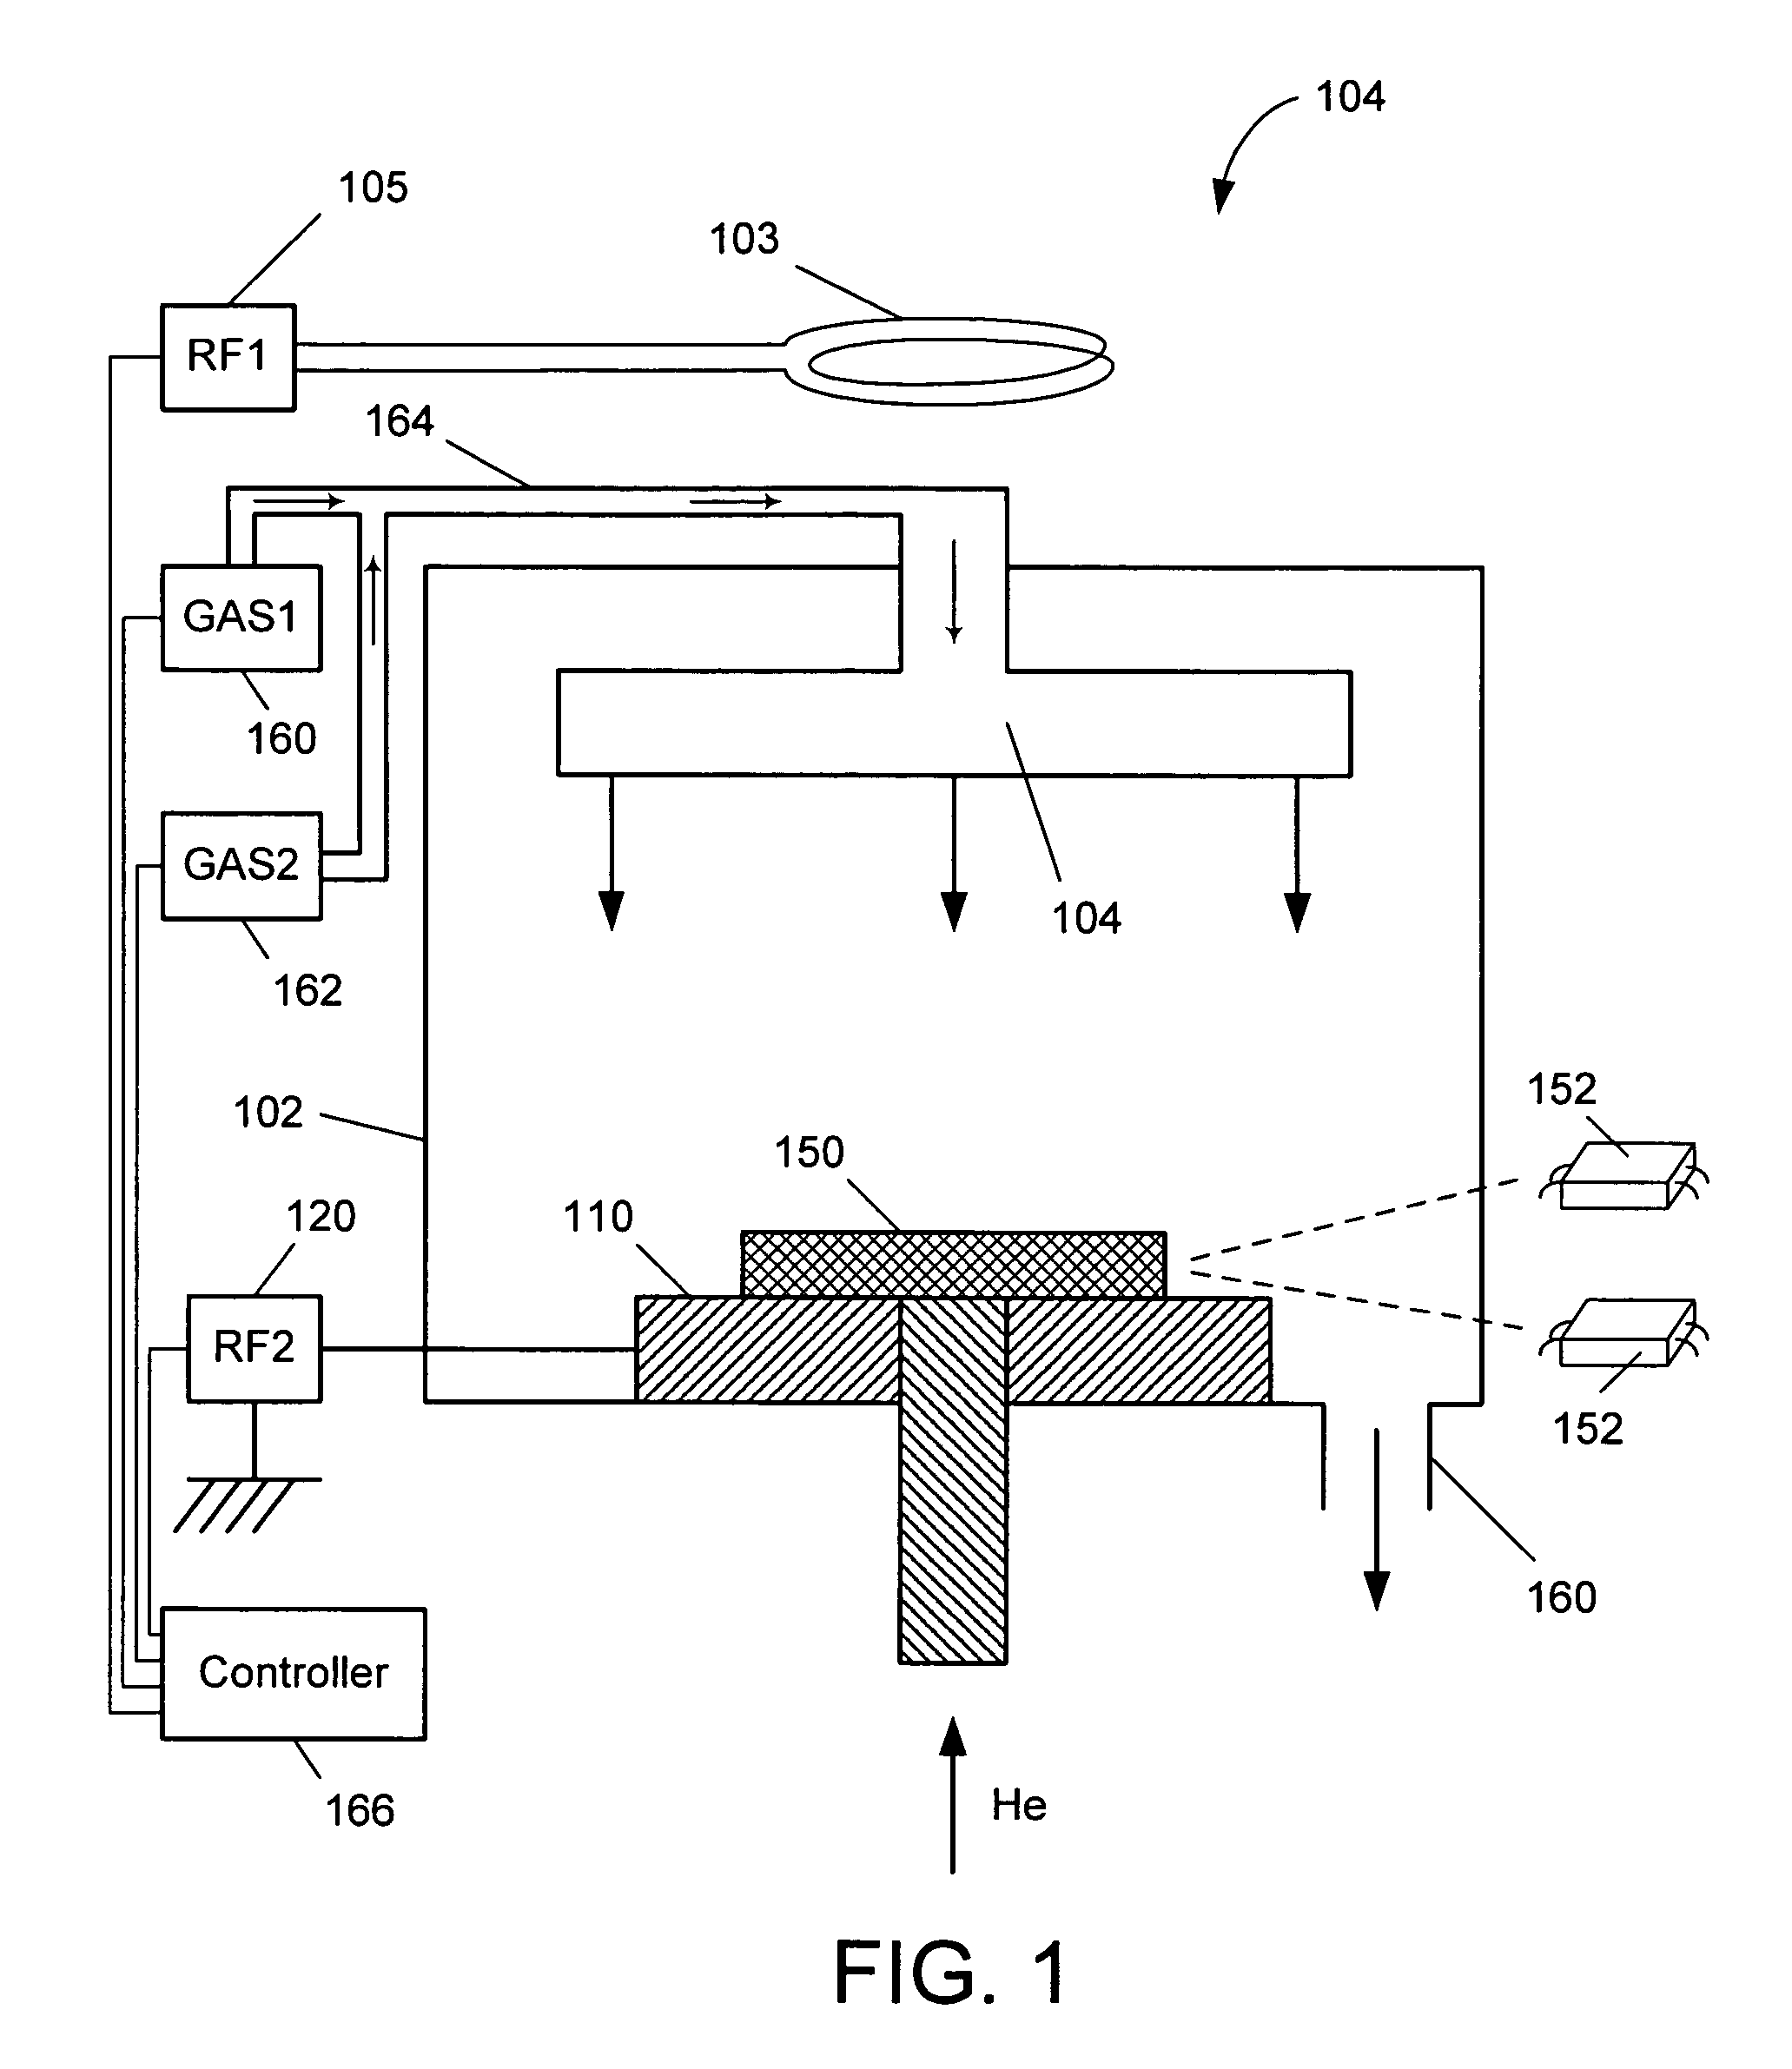 Method to improve ignition in plasma etching or plasma deposition steps